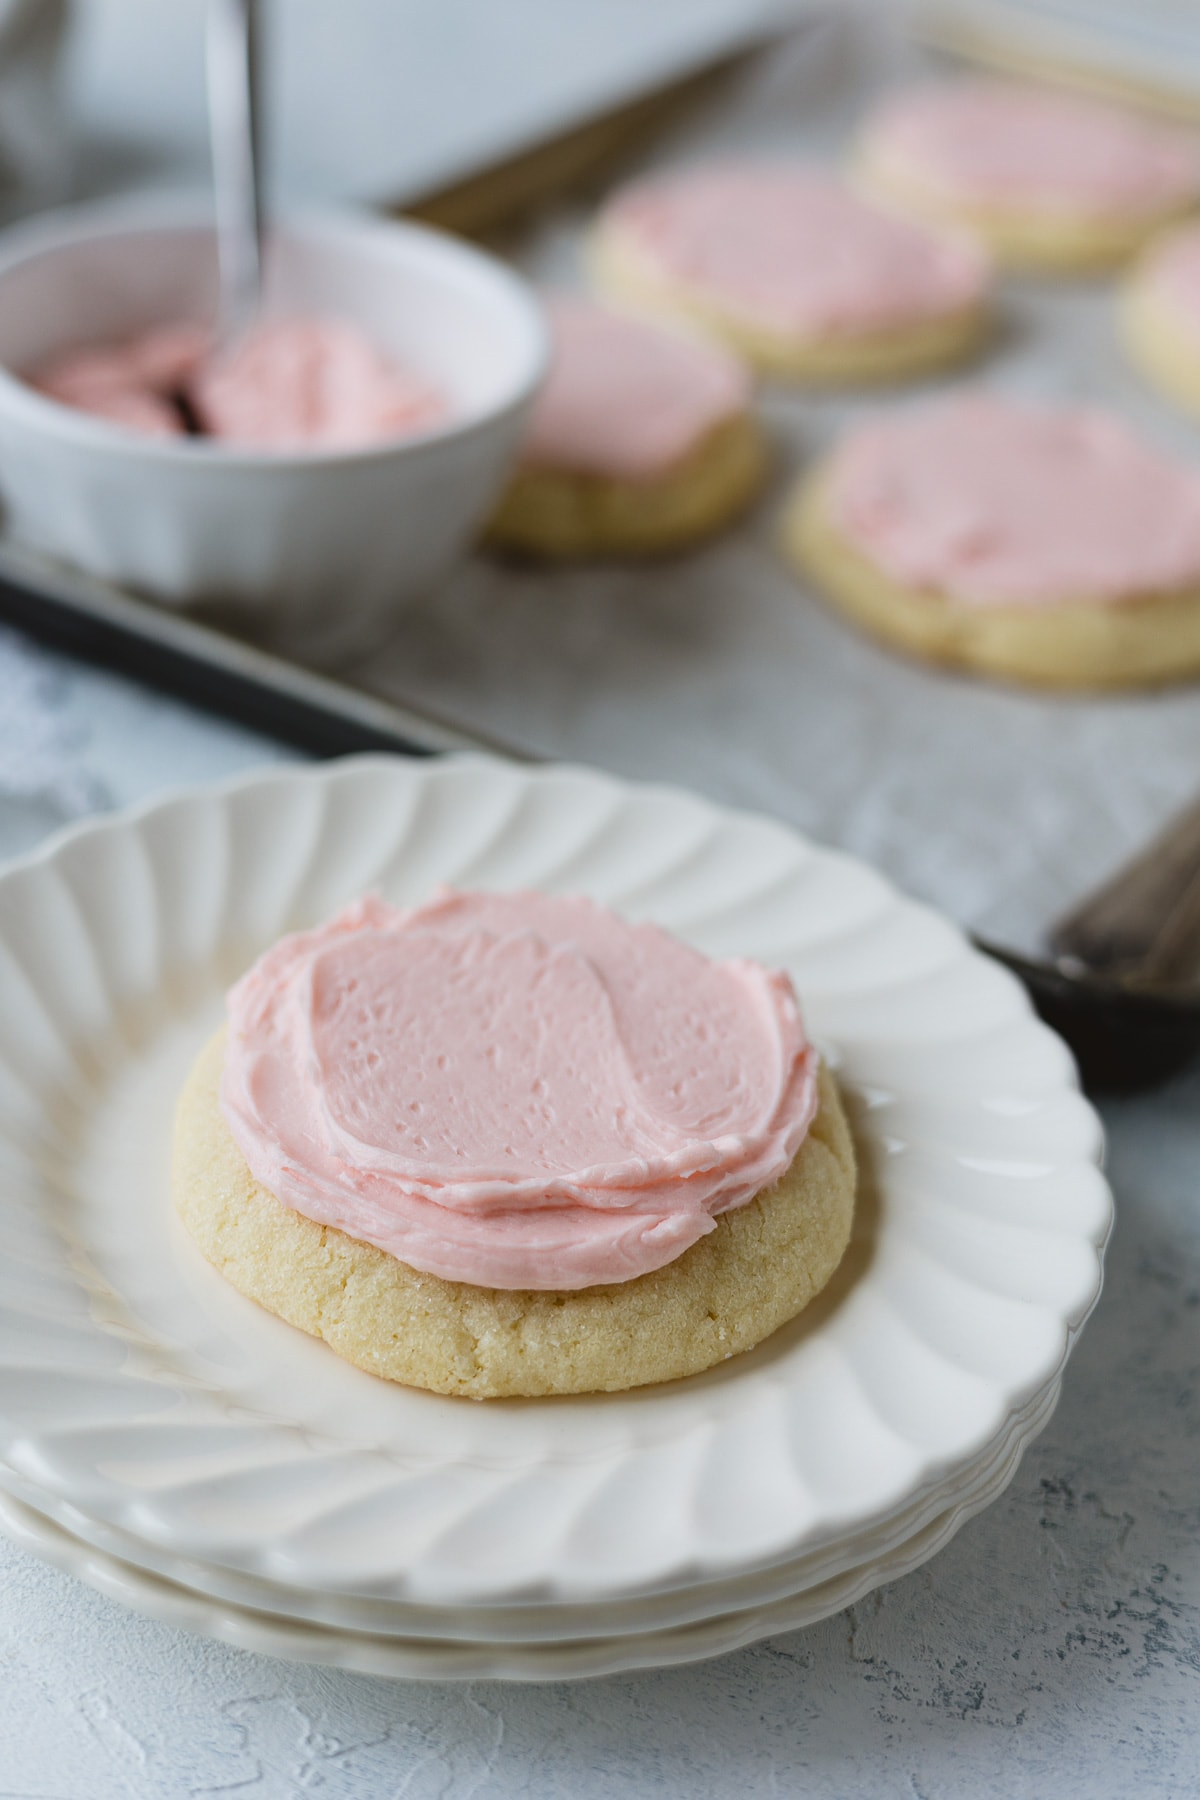 A pink frosted Crumbl copycat sugar cookie on a stack of small scalloped plates.